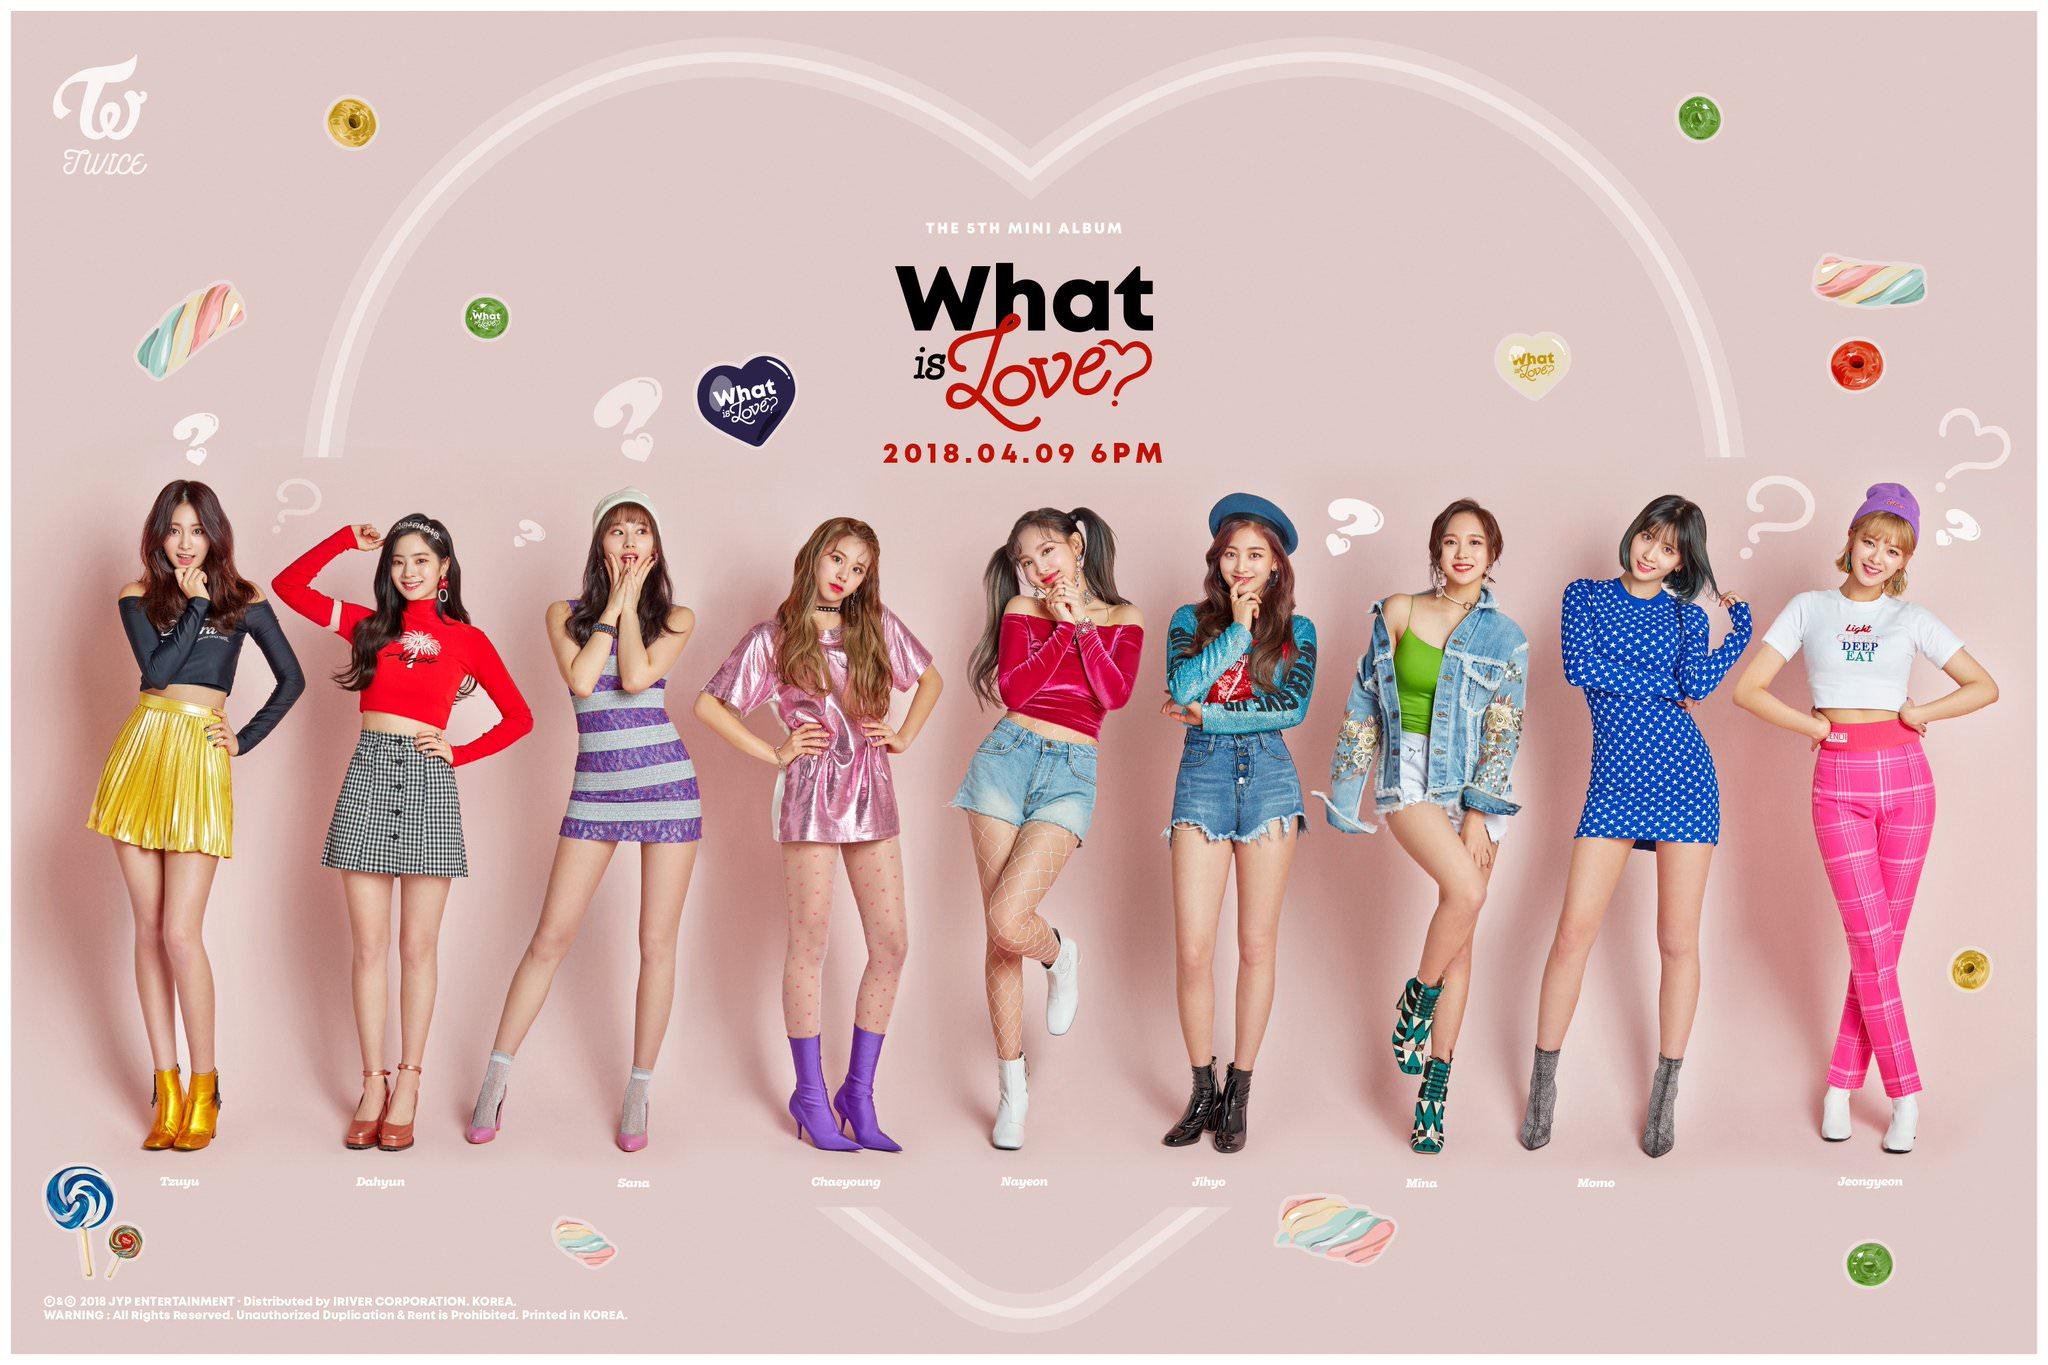 FULL HQ TWICE Teaser Photo and Photo Card Image for What